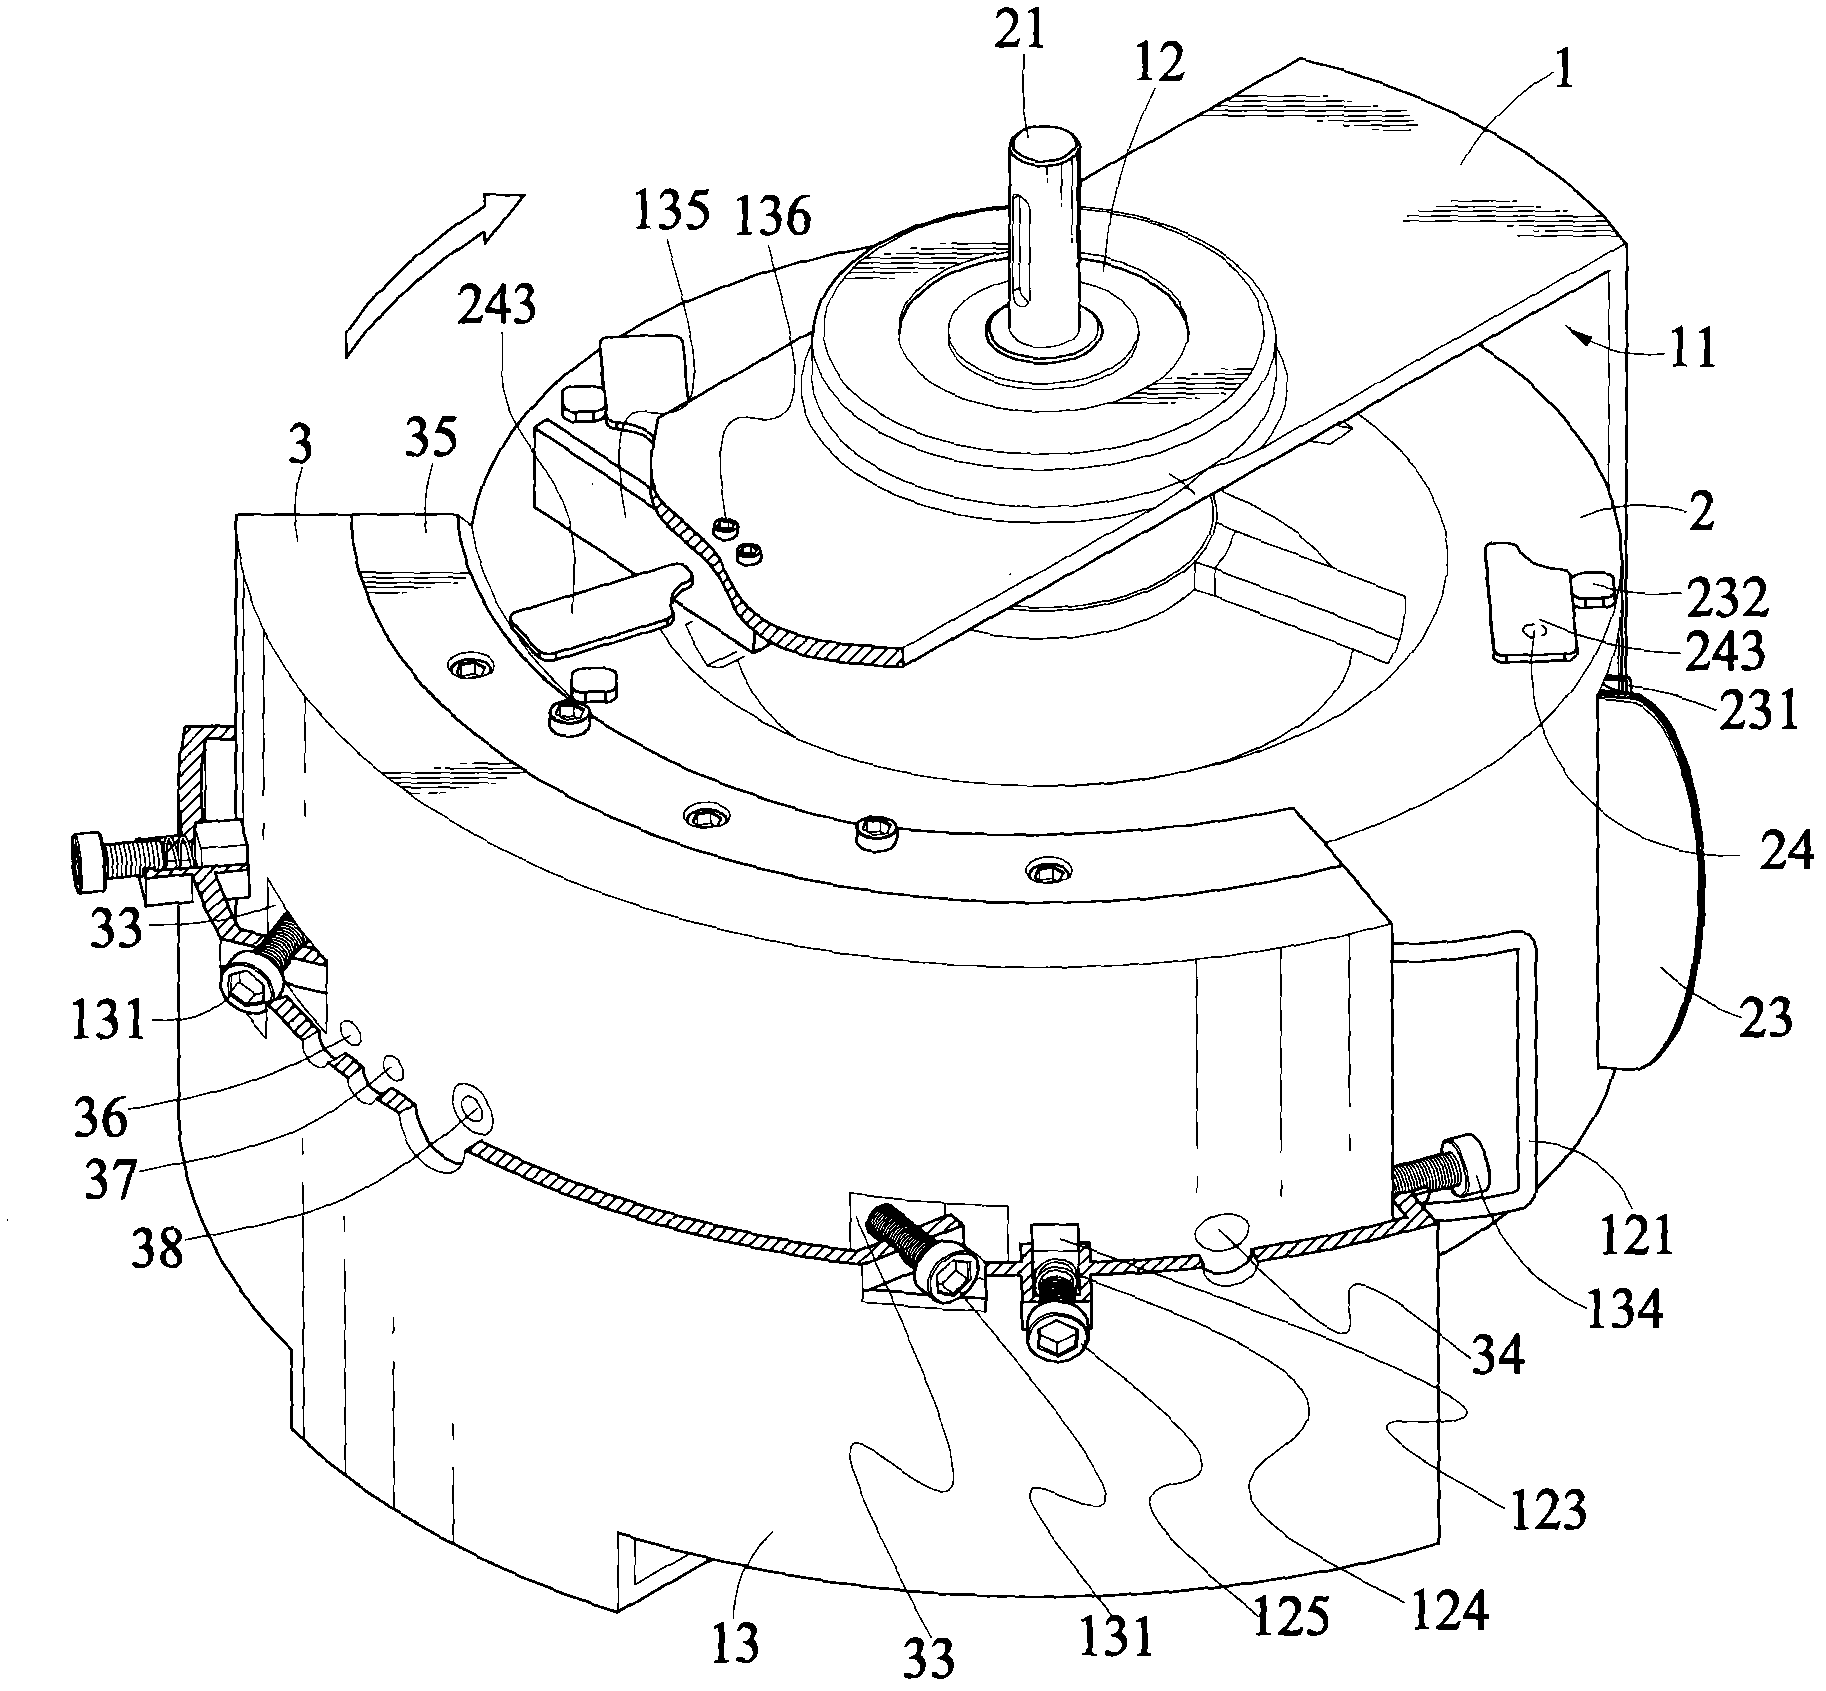 Improved structure of rotary engine